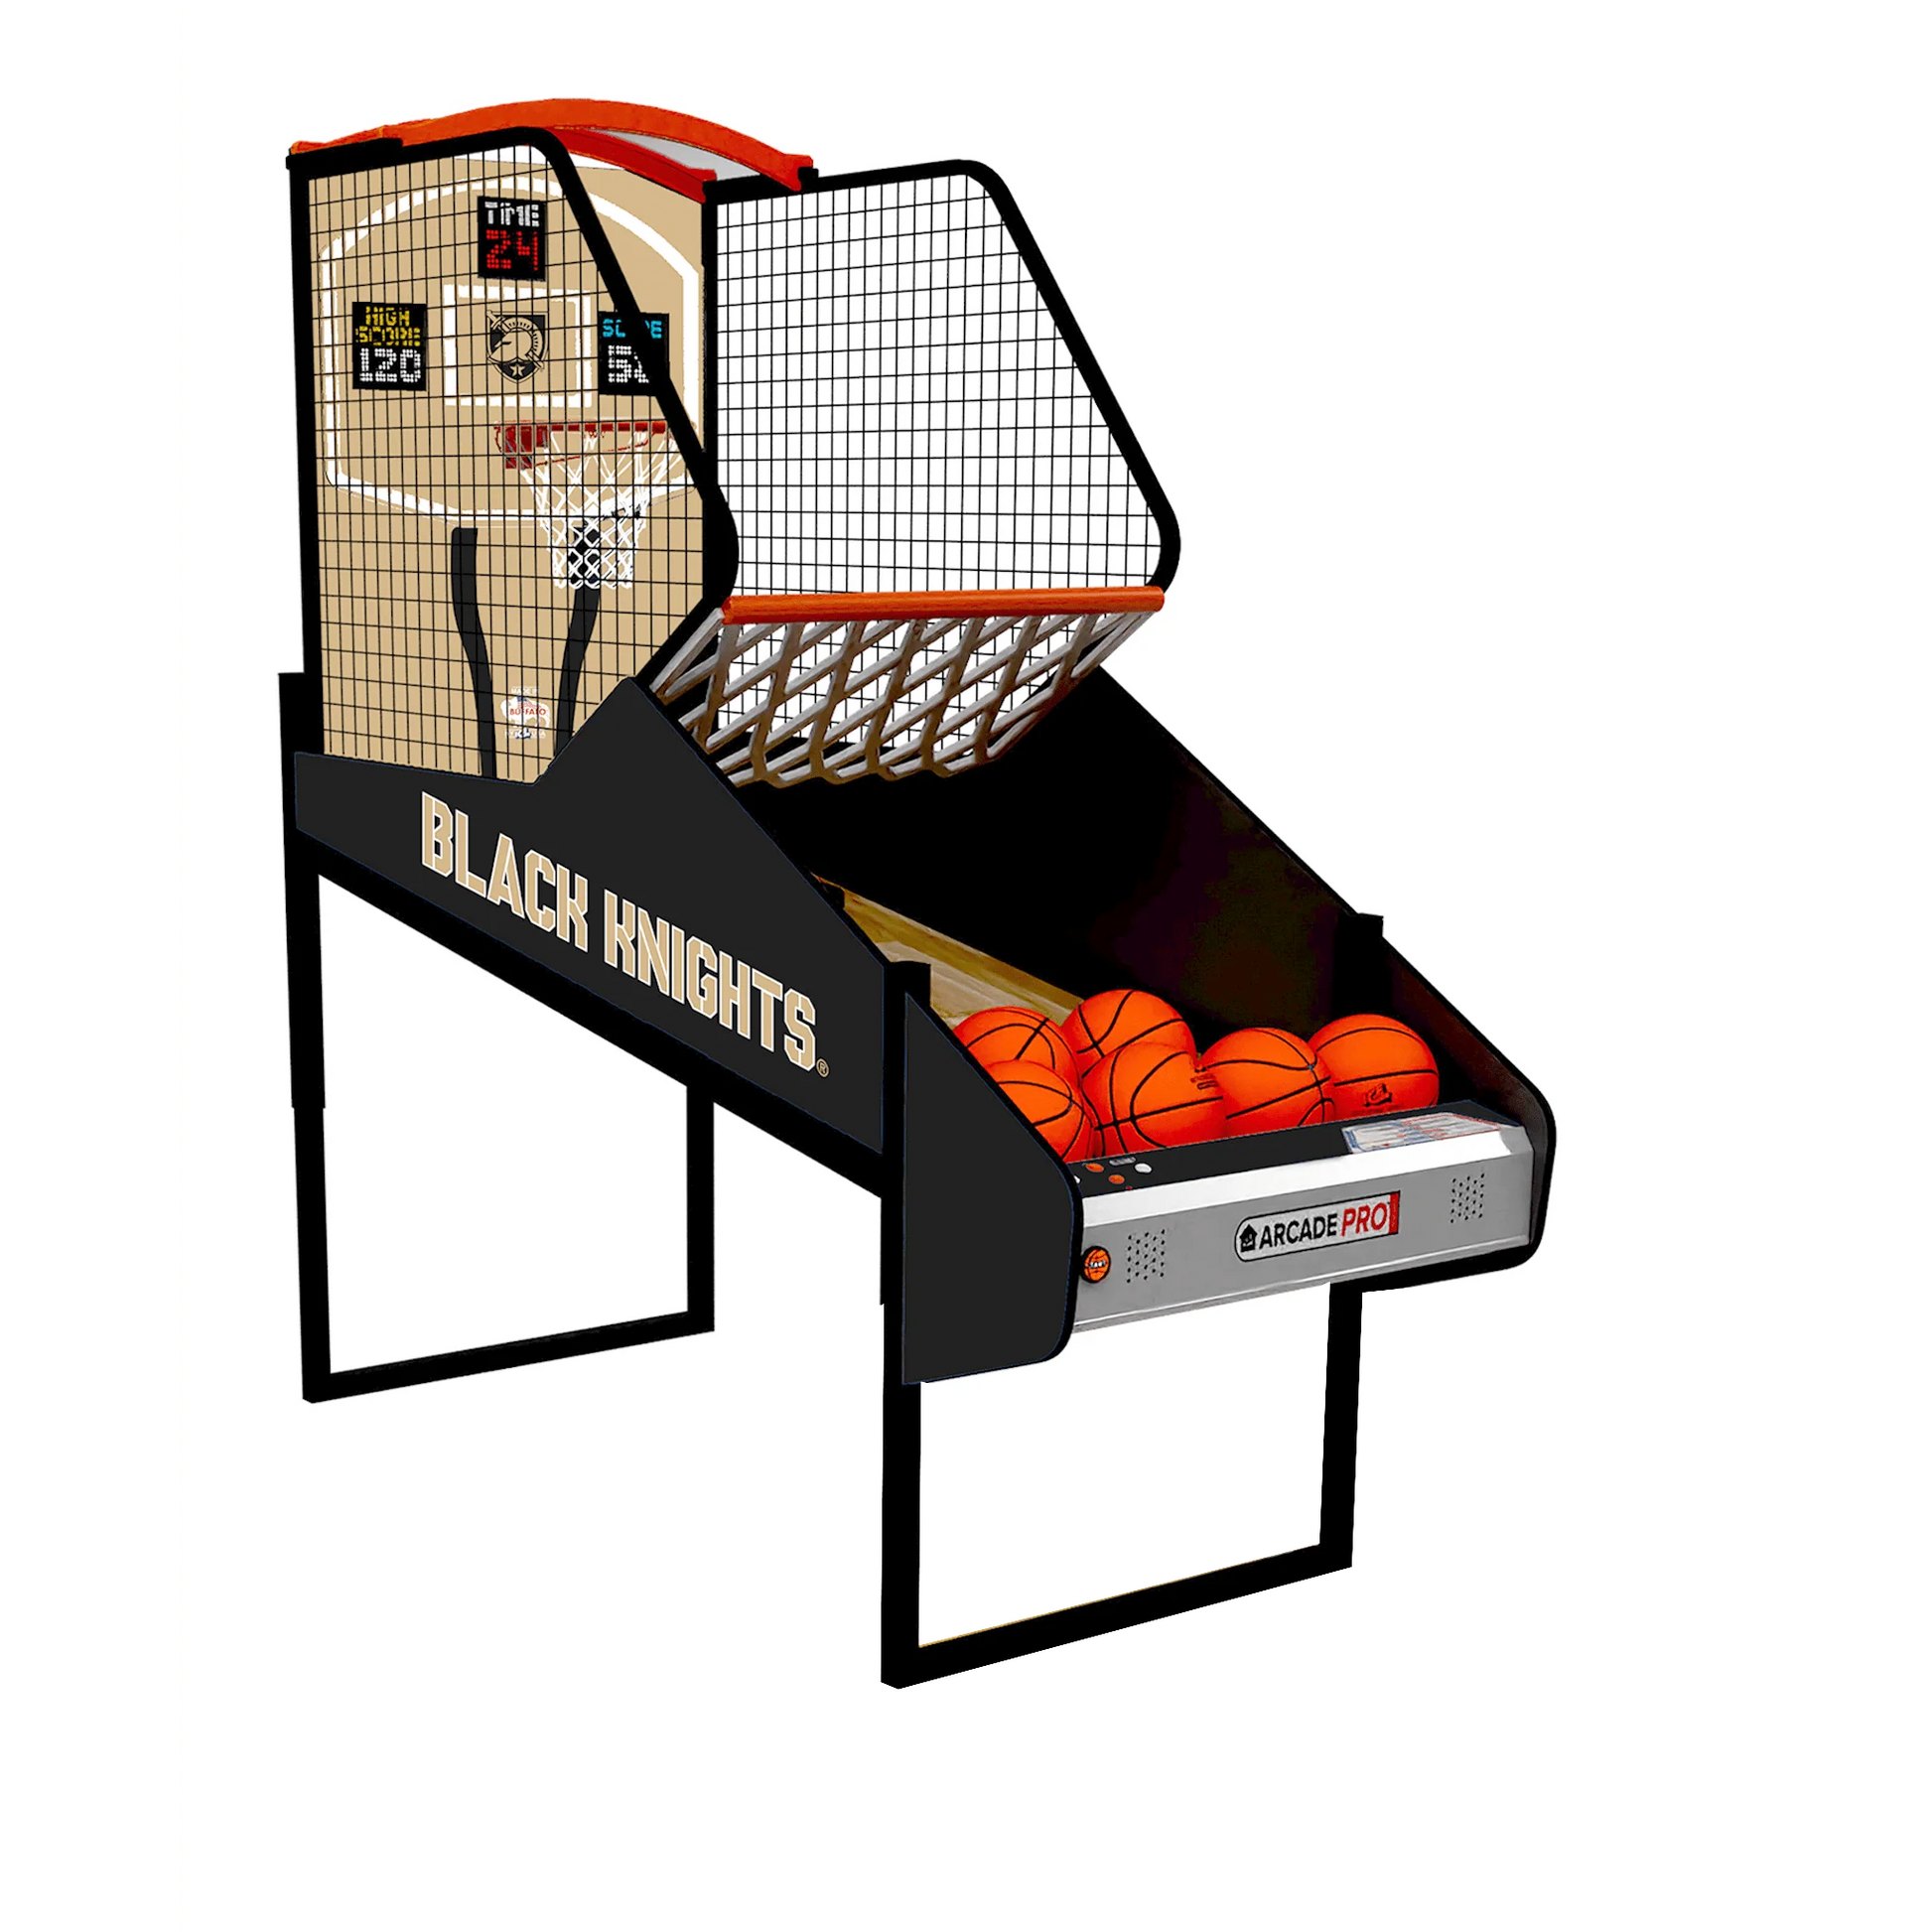 Army Black Knights West Point College Hoops Arcade Innovative Concepts in Entertainment   